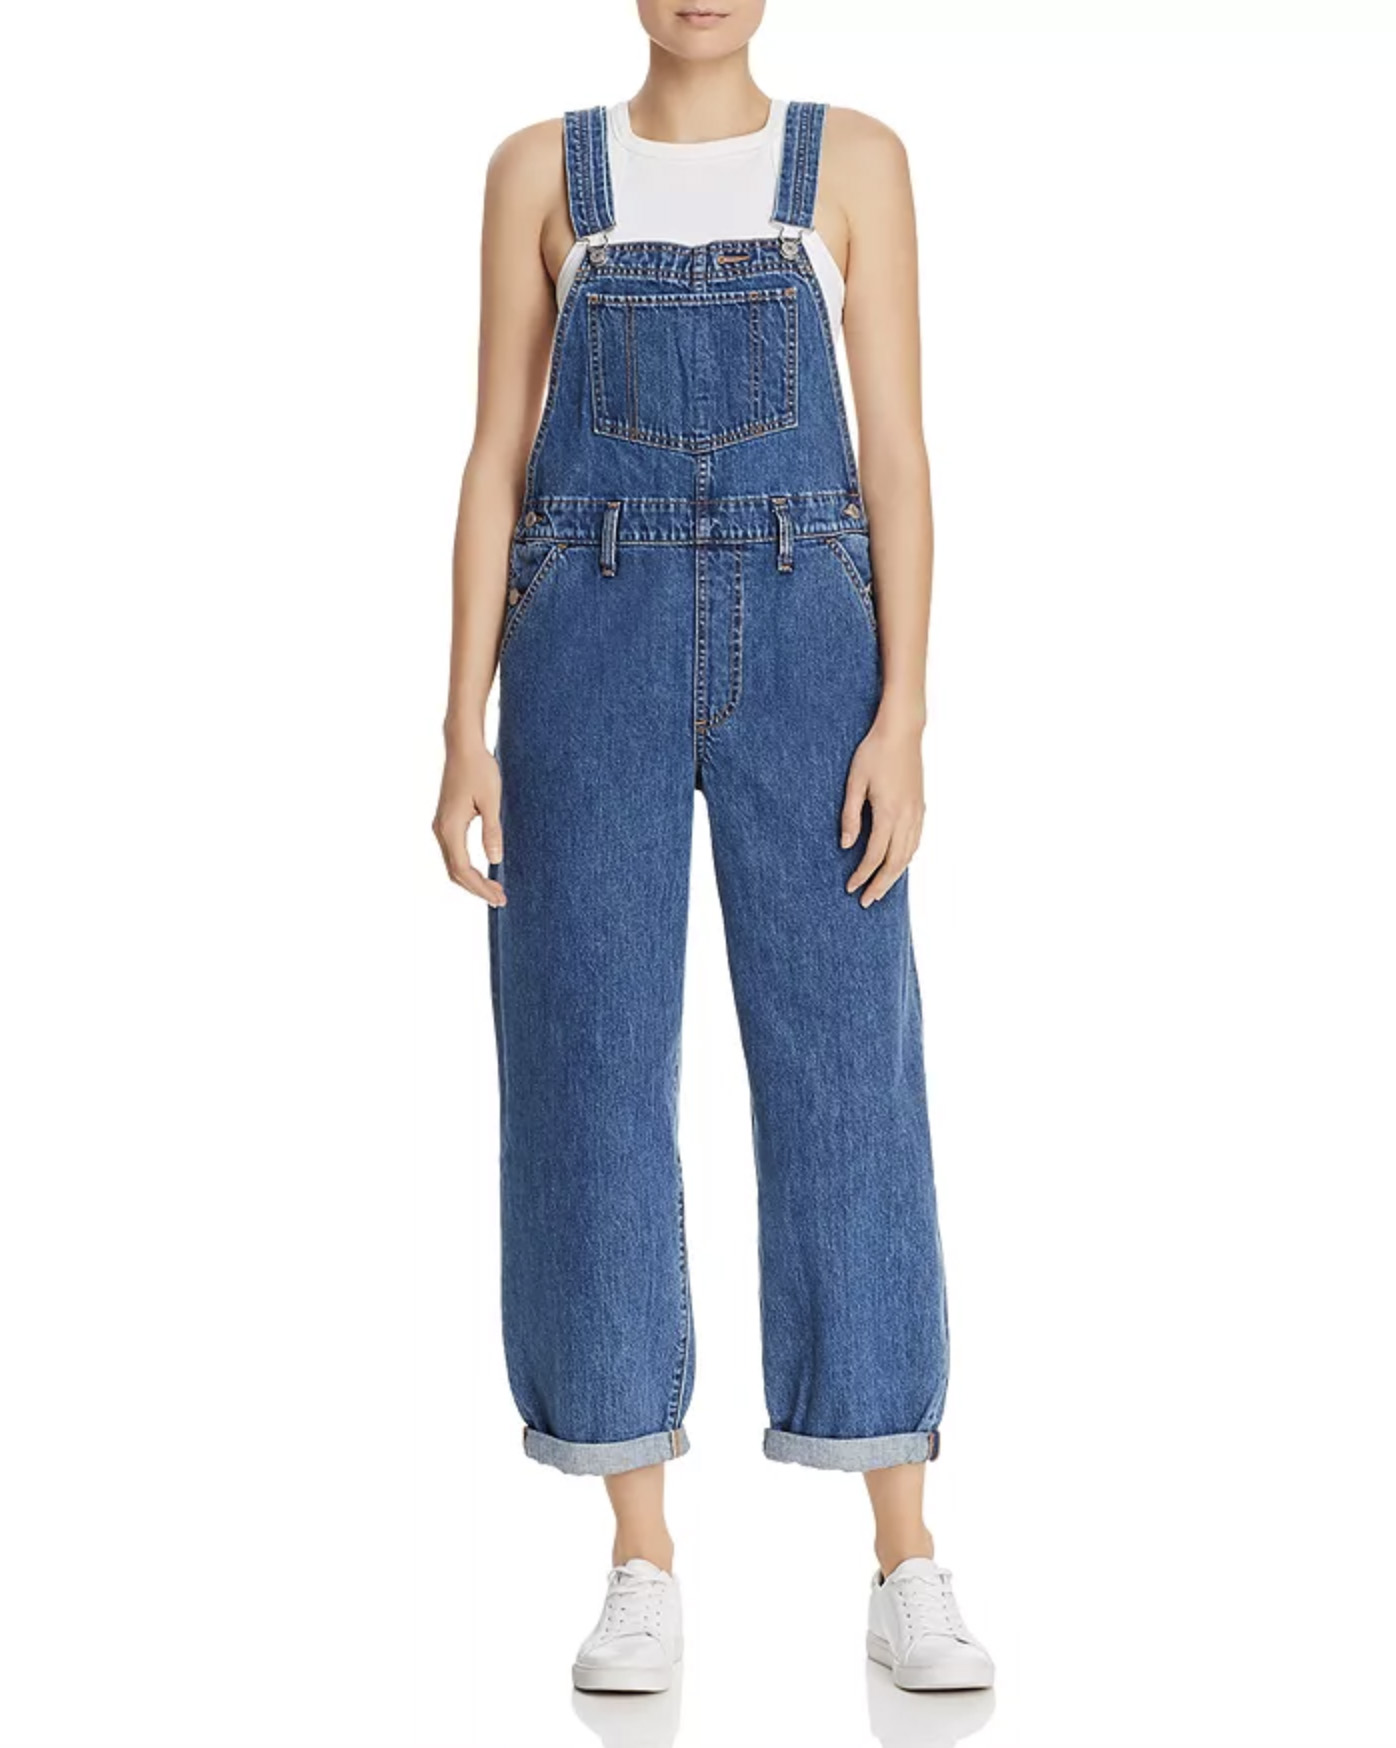 Levi's Baggy Denim Overalls in Larger Than Life